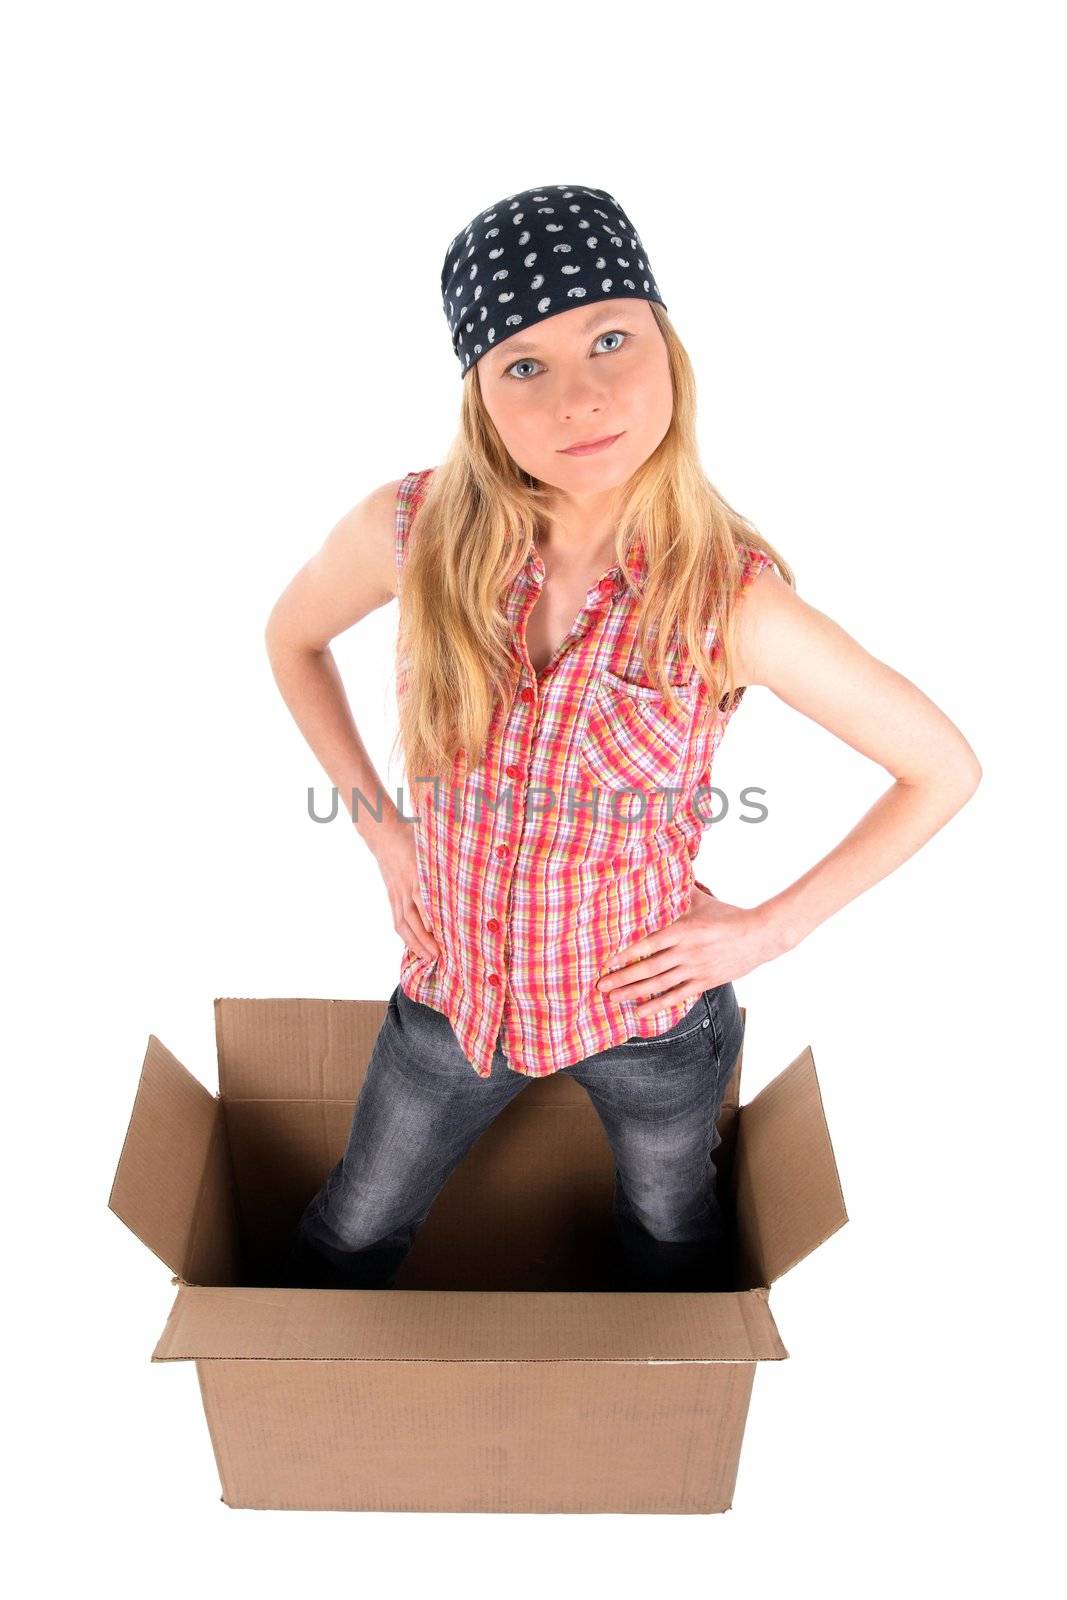 Girl standing in a cardboard box, looking up. Isolated on white.